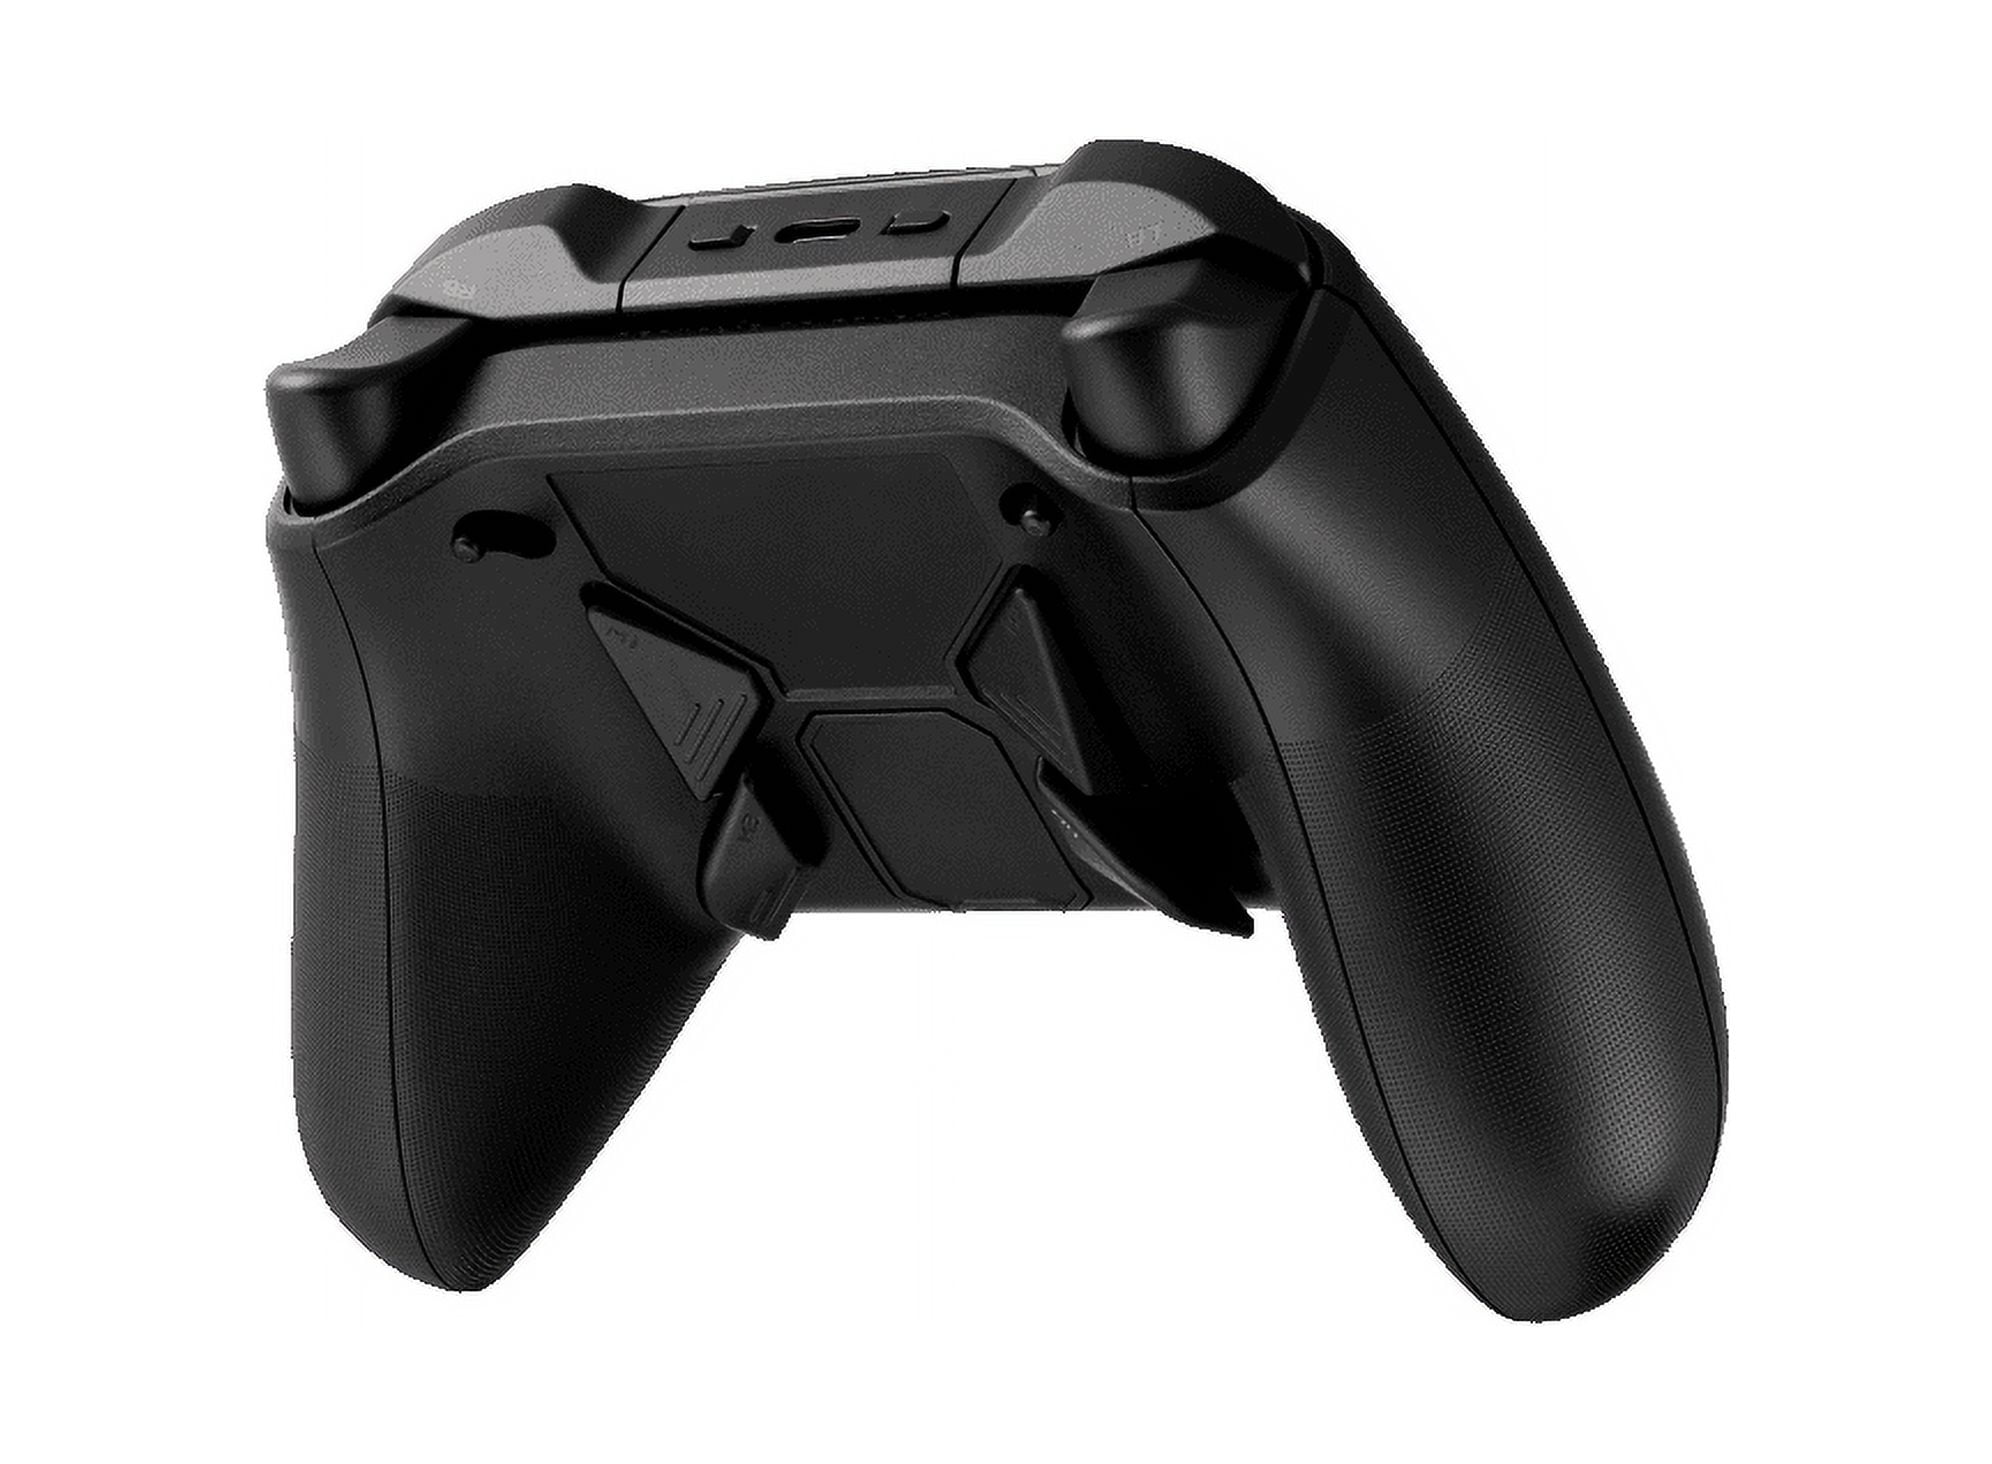 ASUS ROG Raikiri Pro gaming controller, OLED display, tri-mode  connectivity, remappable buttons&triggers, 4 rear buttons, step&linear  triggers